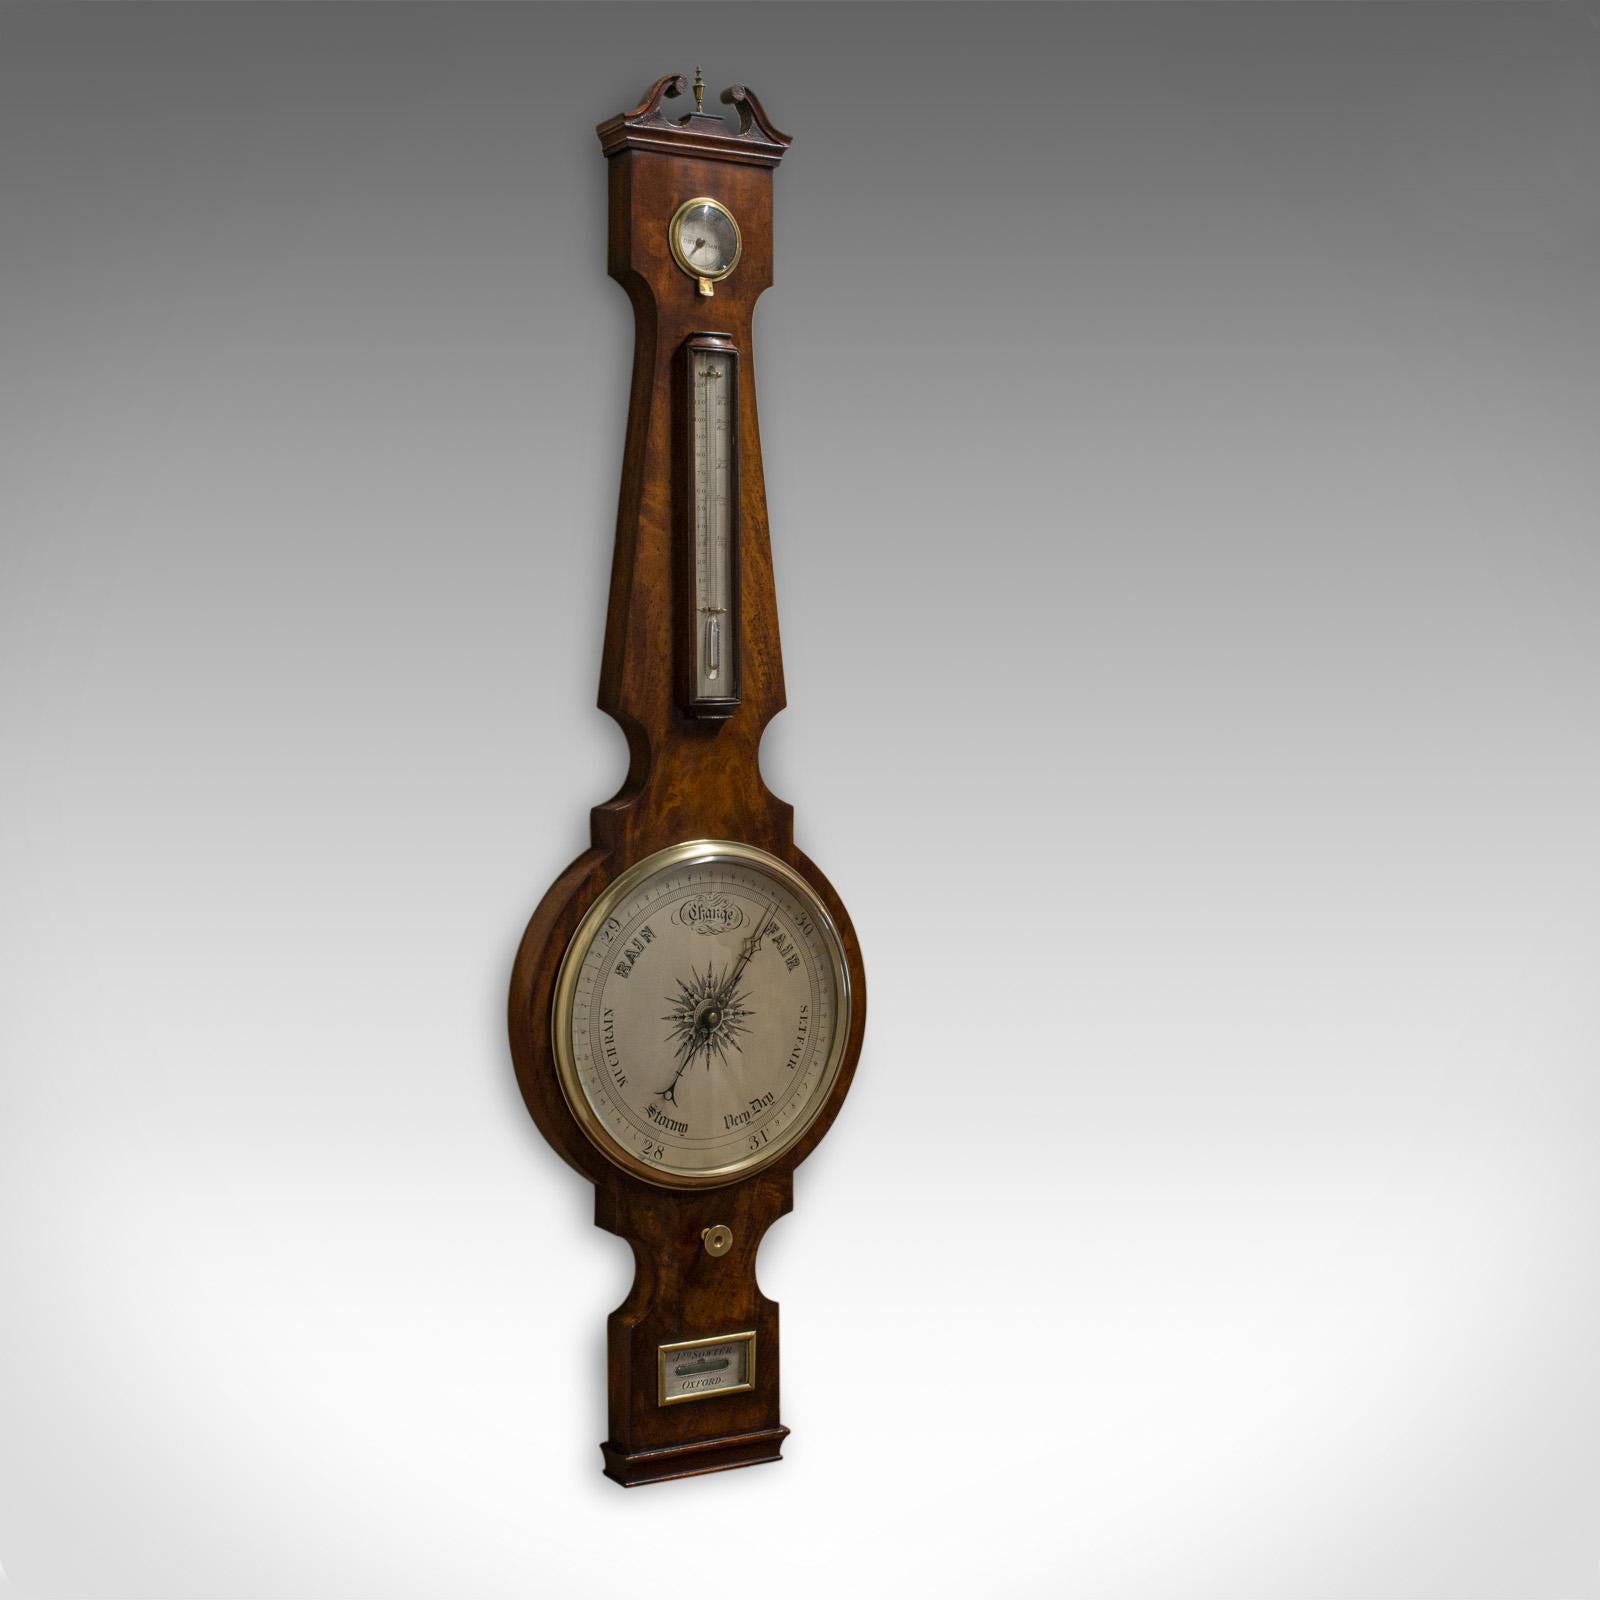 This is an antique banjo barometer. An English, mahogany barometer by John Sowter of Oxford and dating to the Victorian period, circa 1850.

Rich mahogany hues and a desirable aged patina
Bright, clear barometer glass in good order
Brass finial